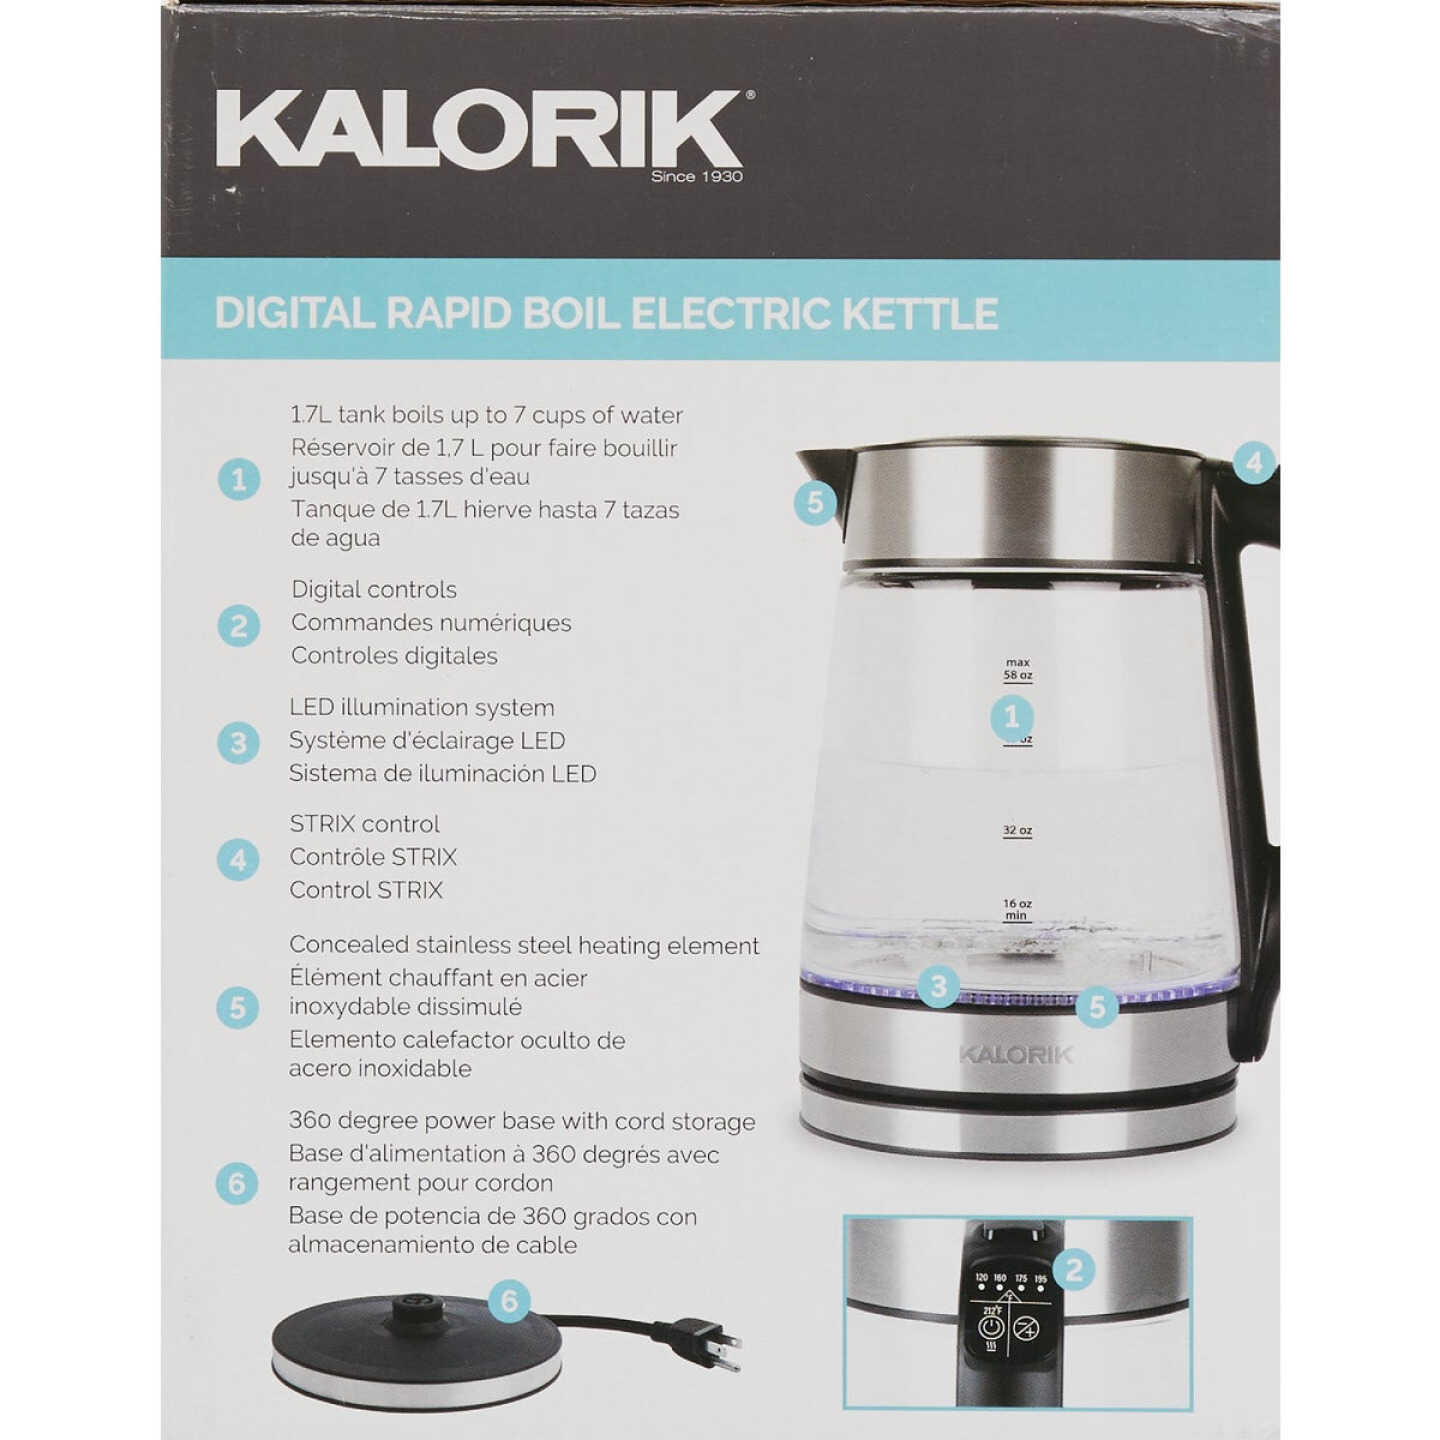 Electric Kettle - Auto-off Rapid Boil Water Heater With Stainless